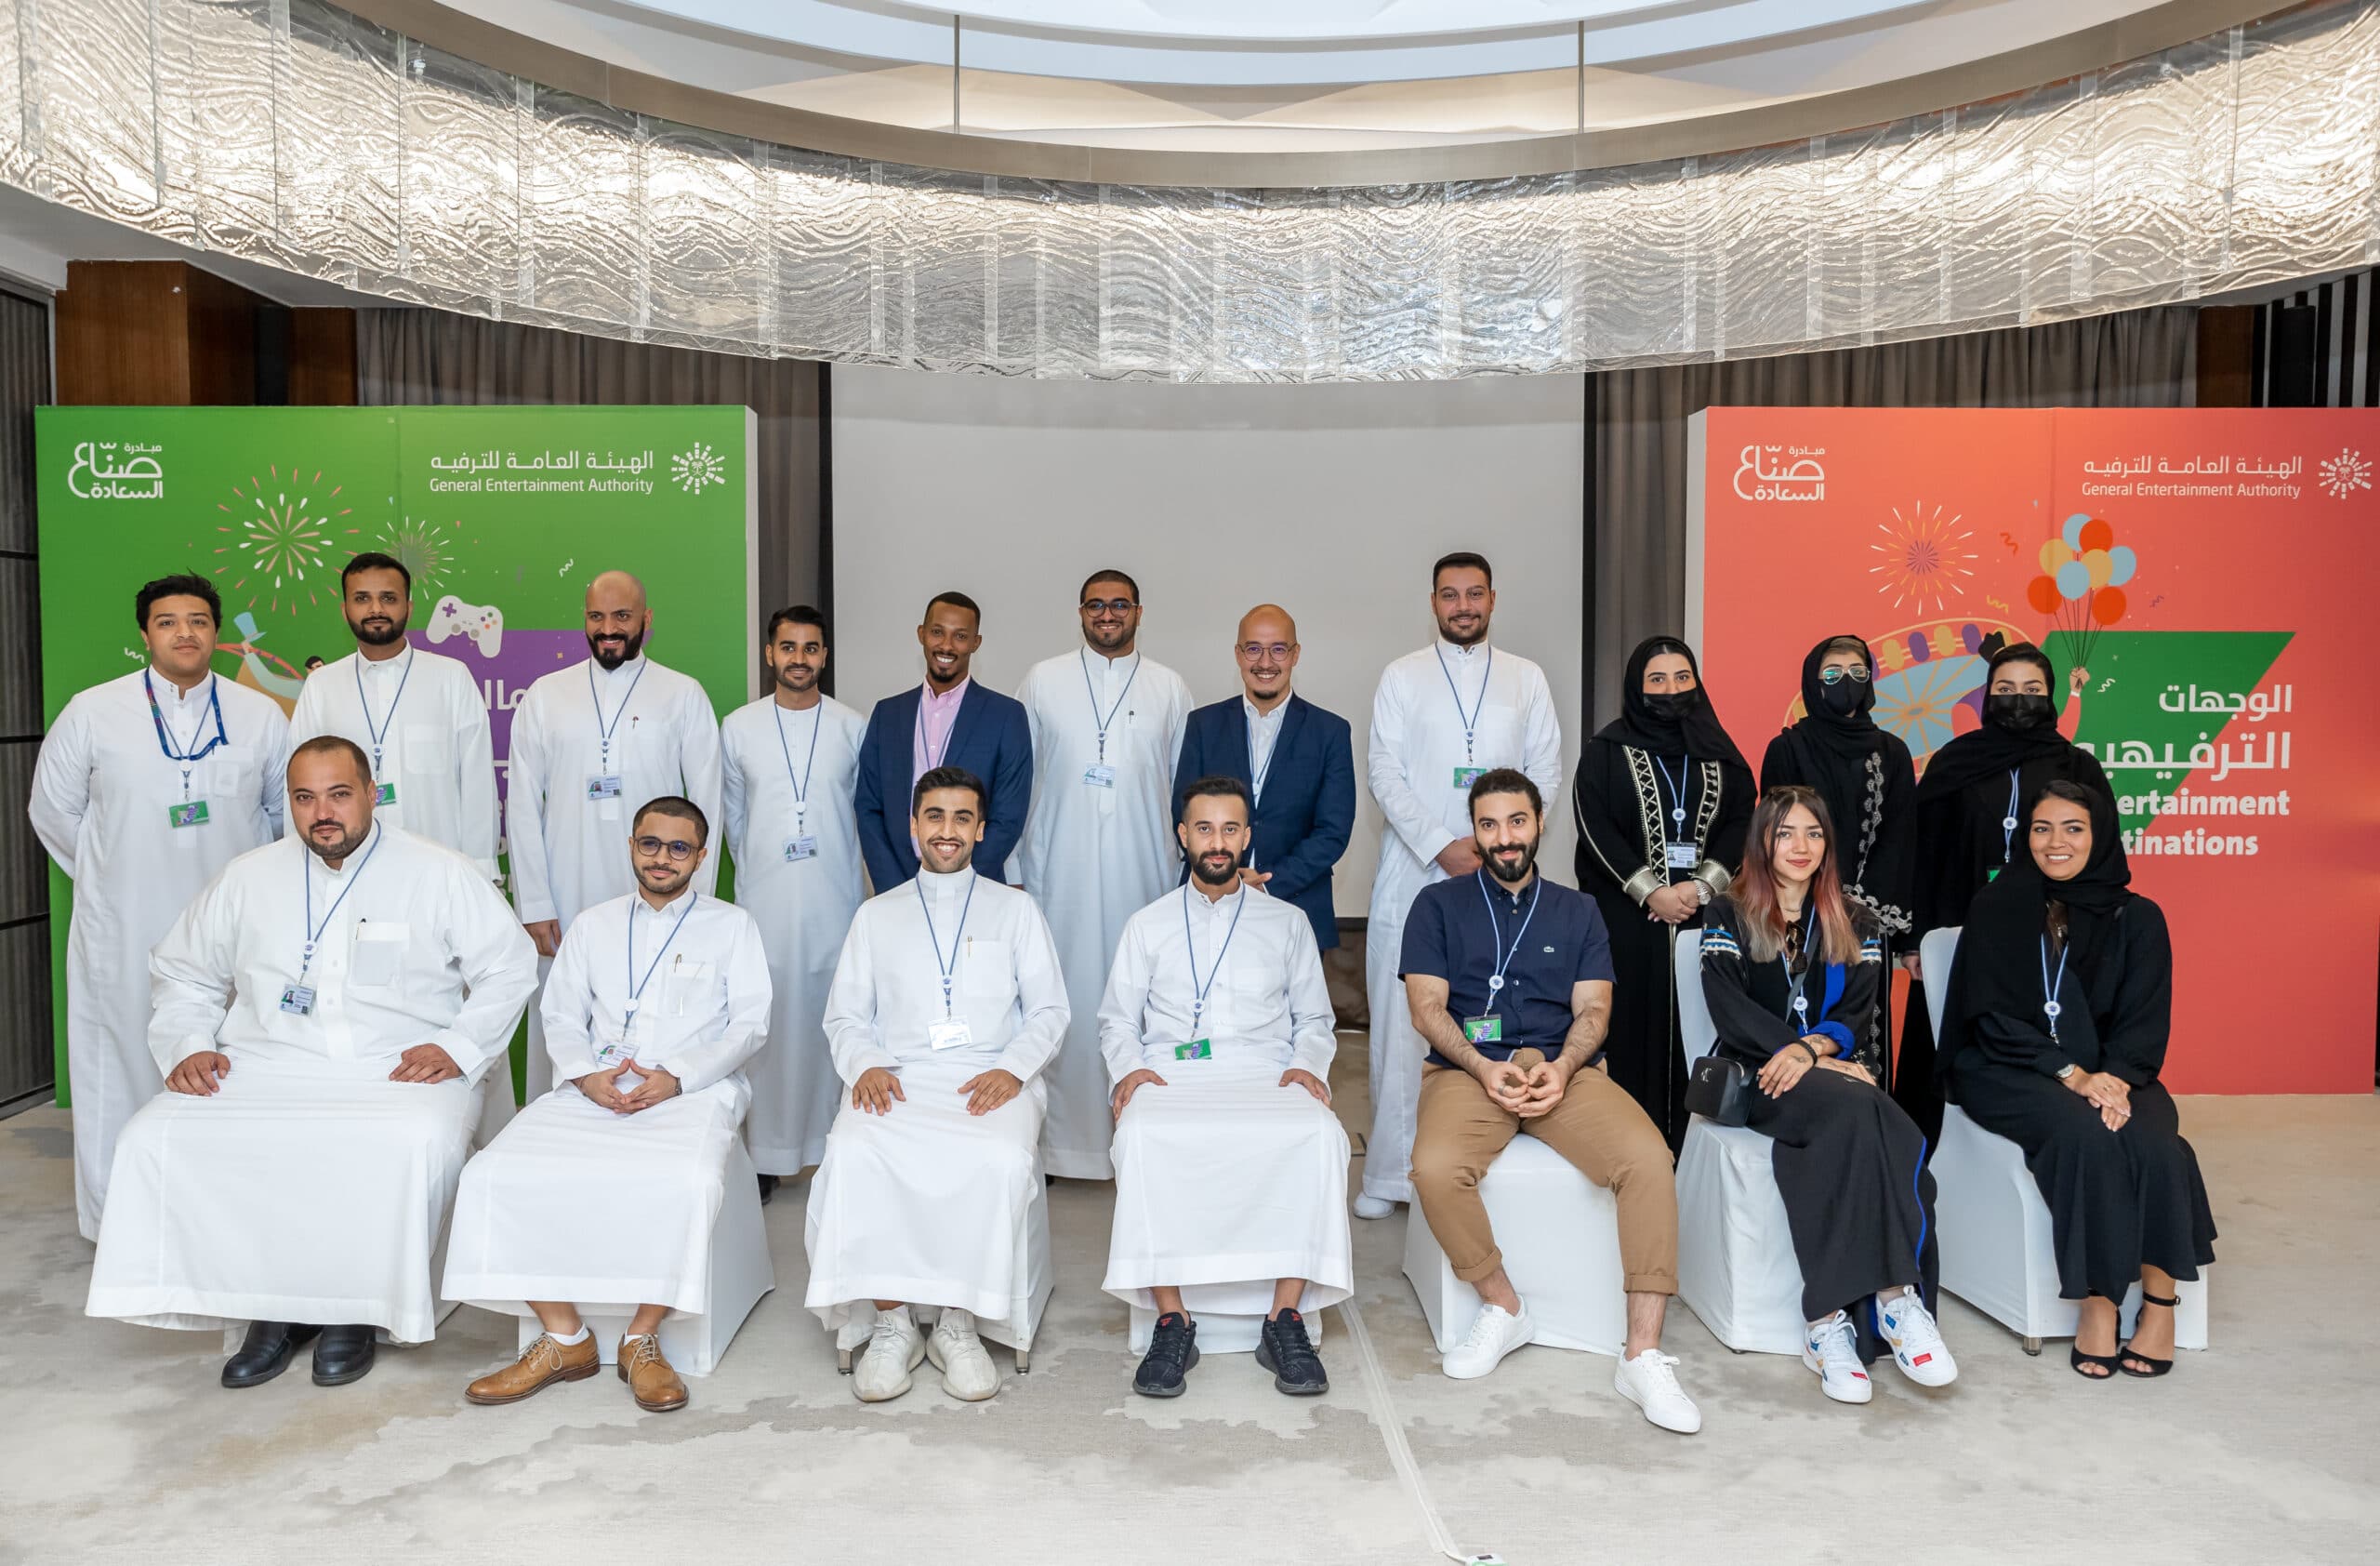 The General Entertainment Authority launches the entertainment destinations track within the Entertainment Fellowship training program